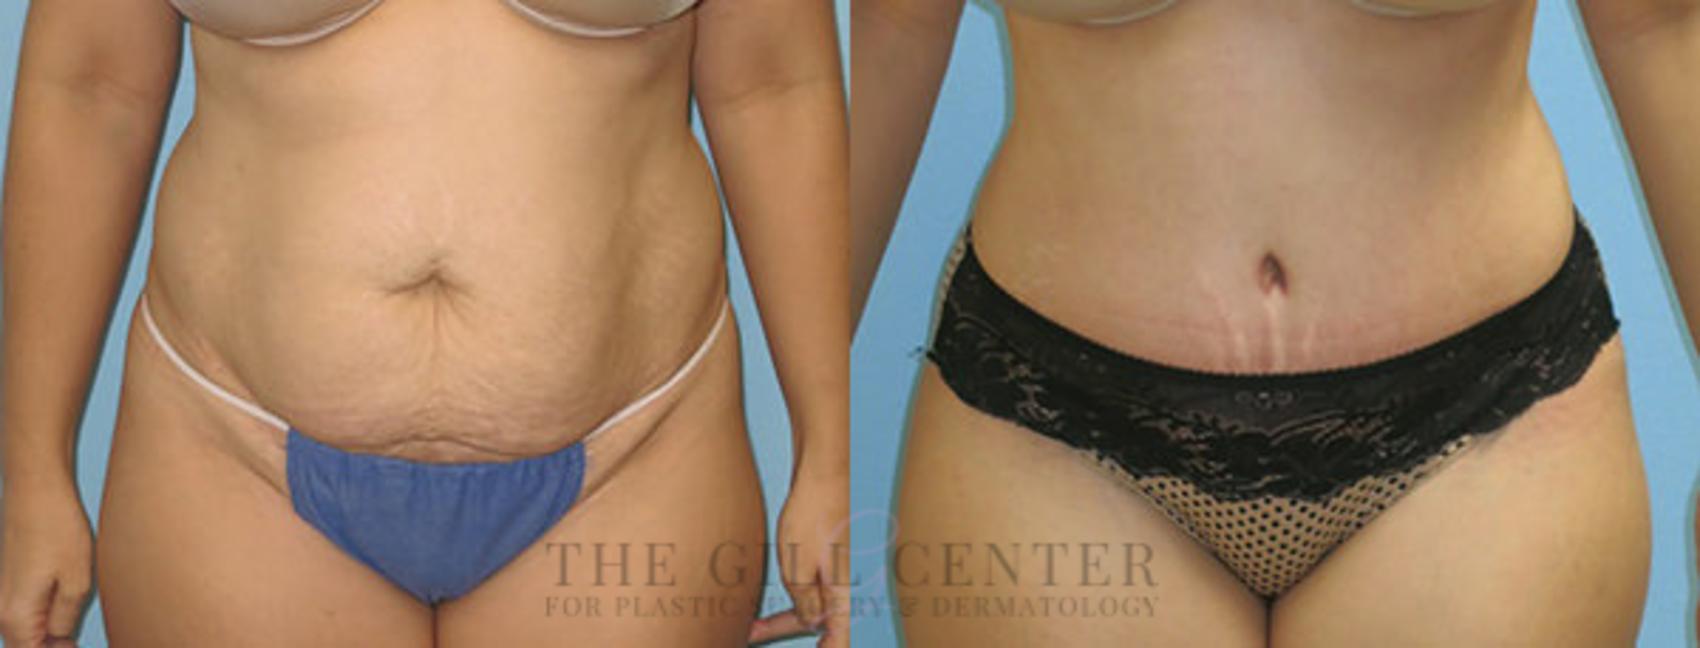 Tummy Tuck Case 209 Before & After Front | The Woodlands, TX | The Gill Center for Plastic Surgery and Dermatology